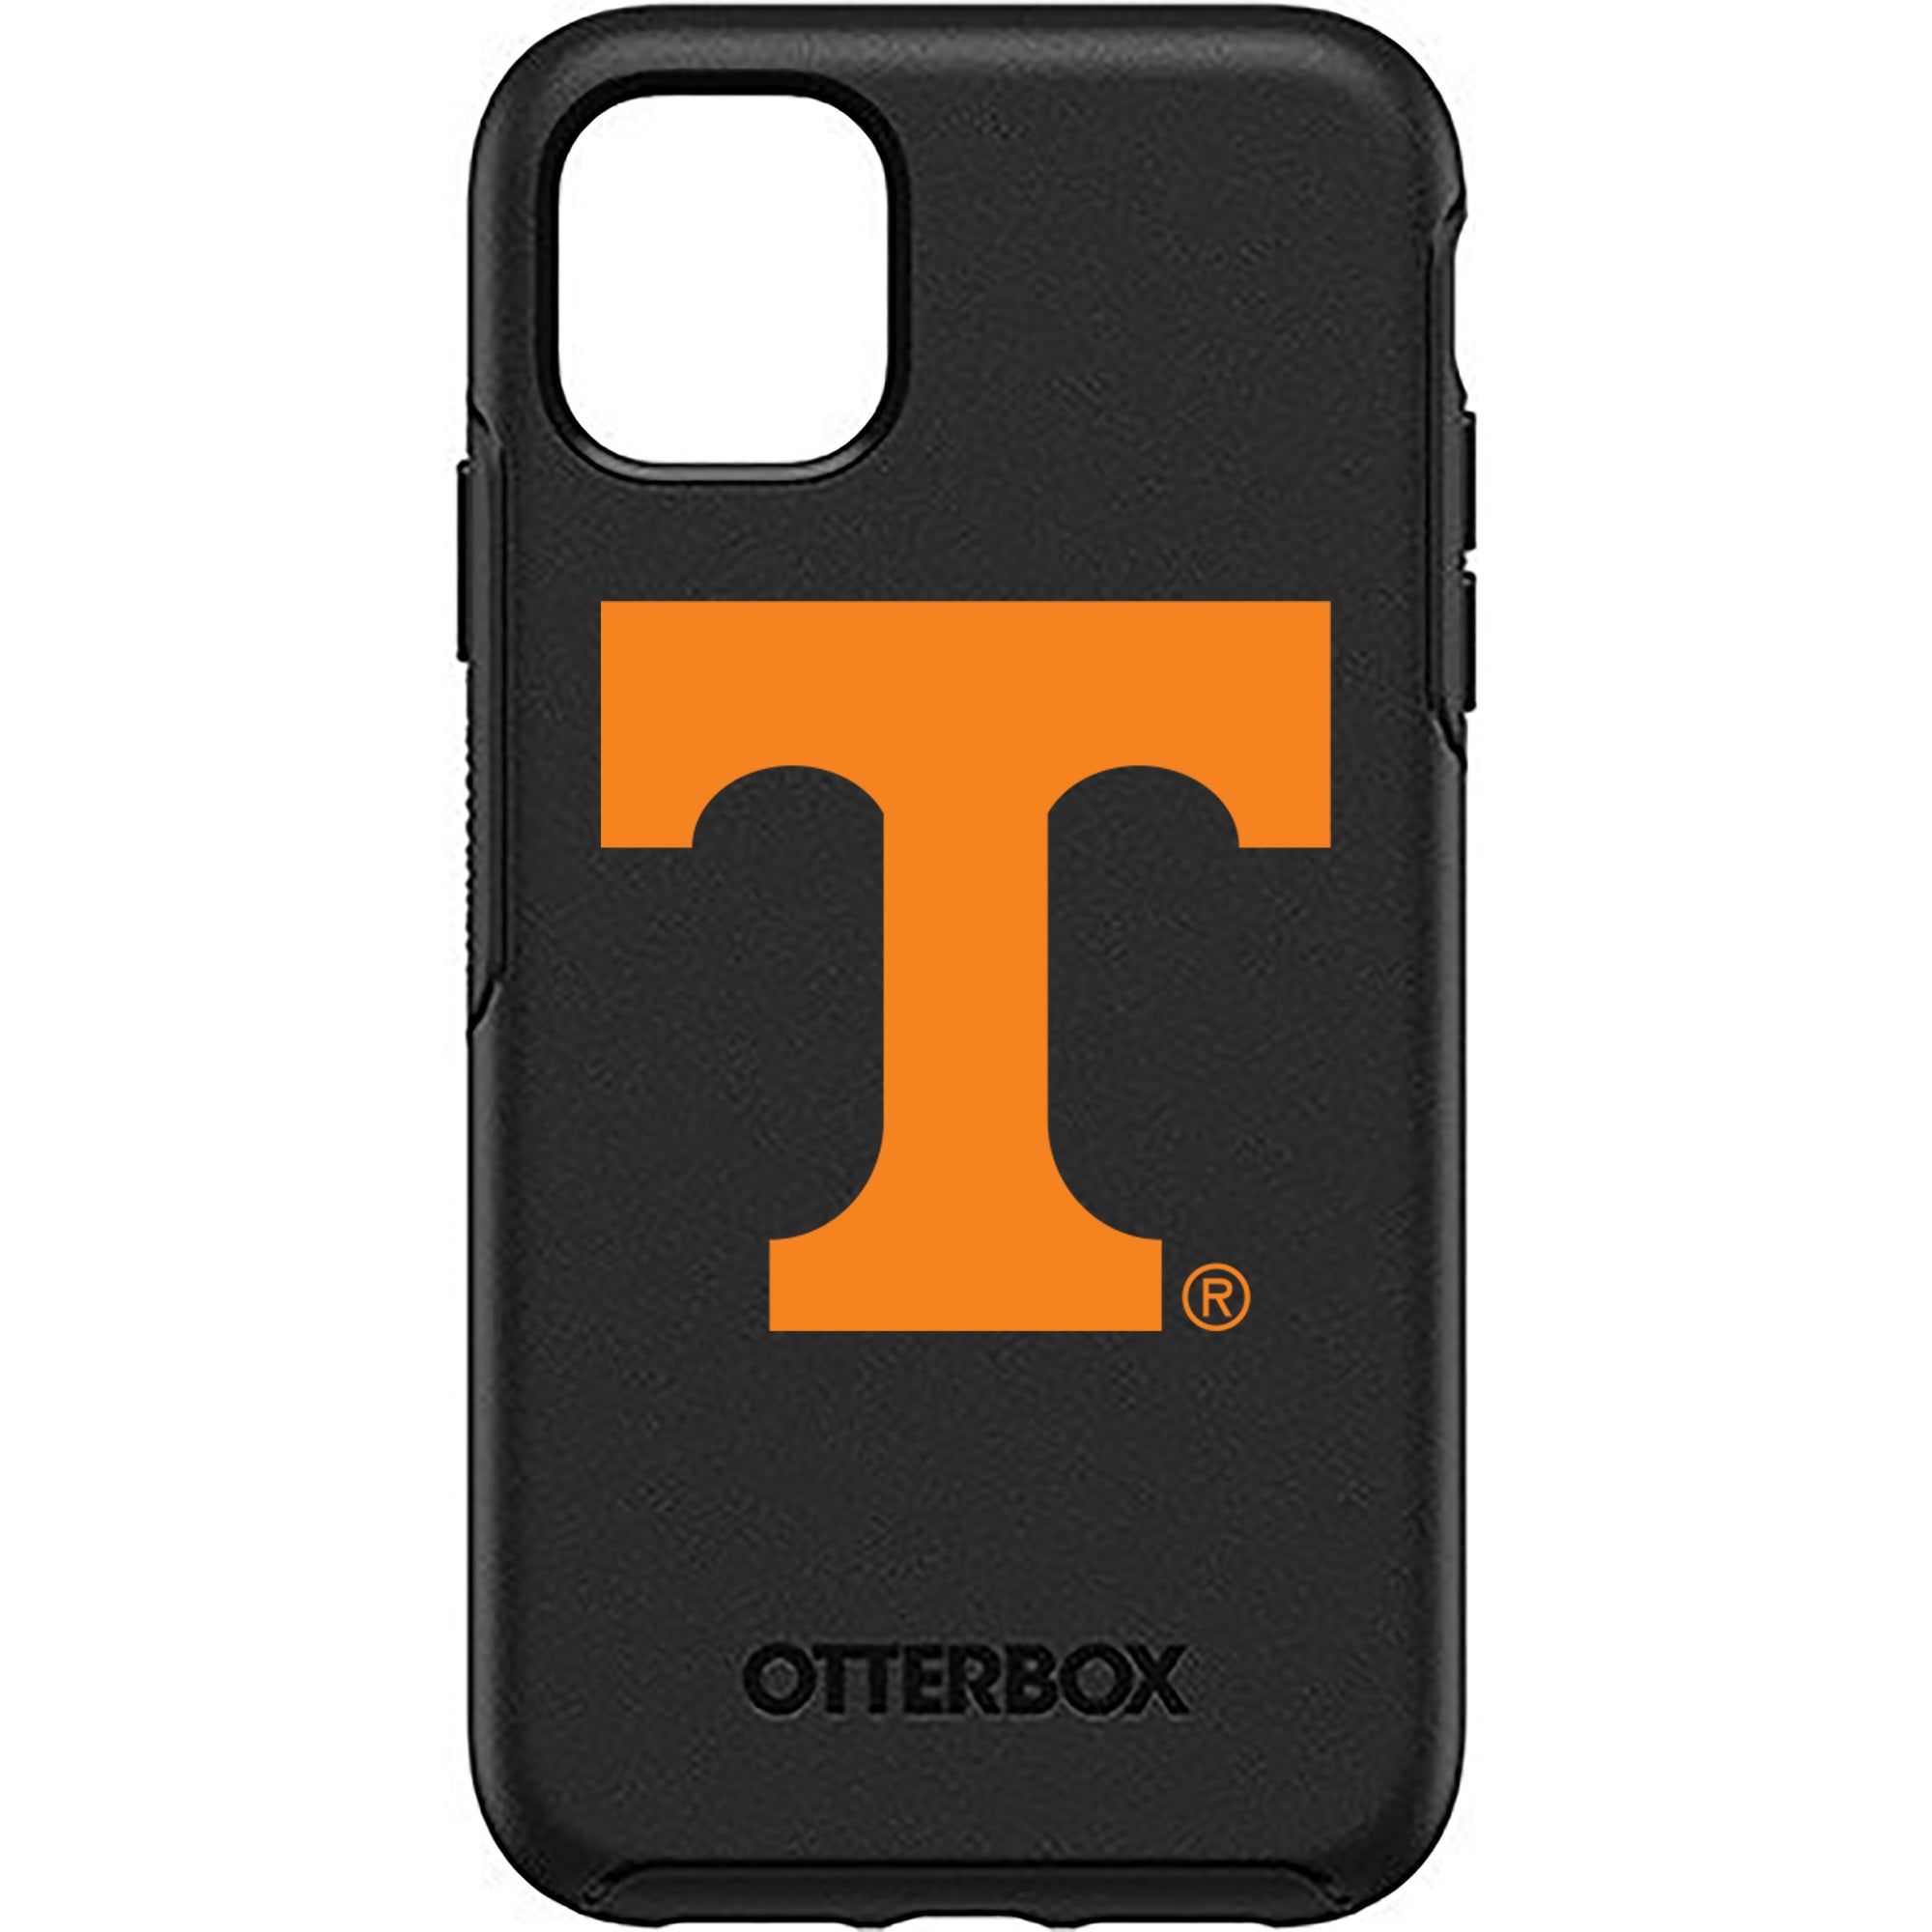 Tennessee Vols Otterbox Symmetry Case (for iPhone 11, Pro, Pro Max)